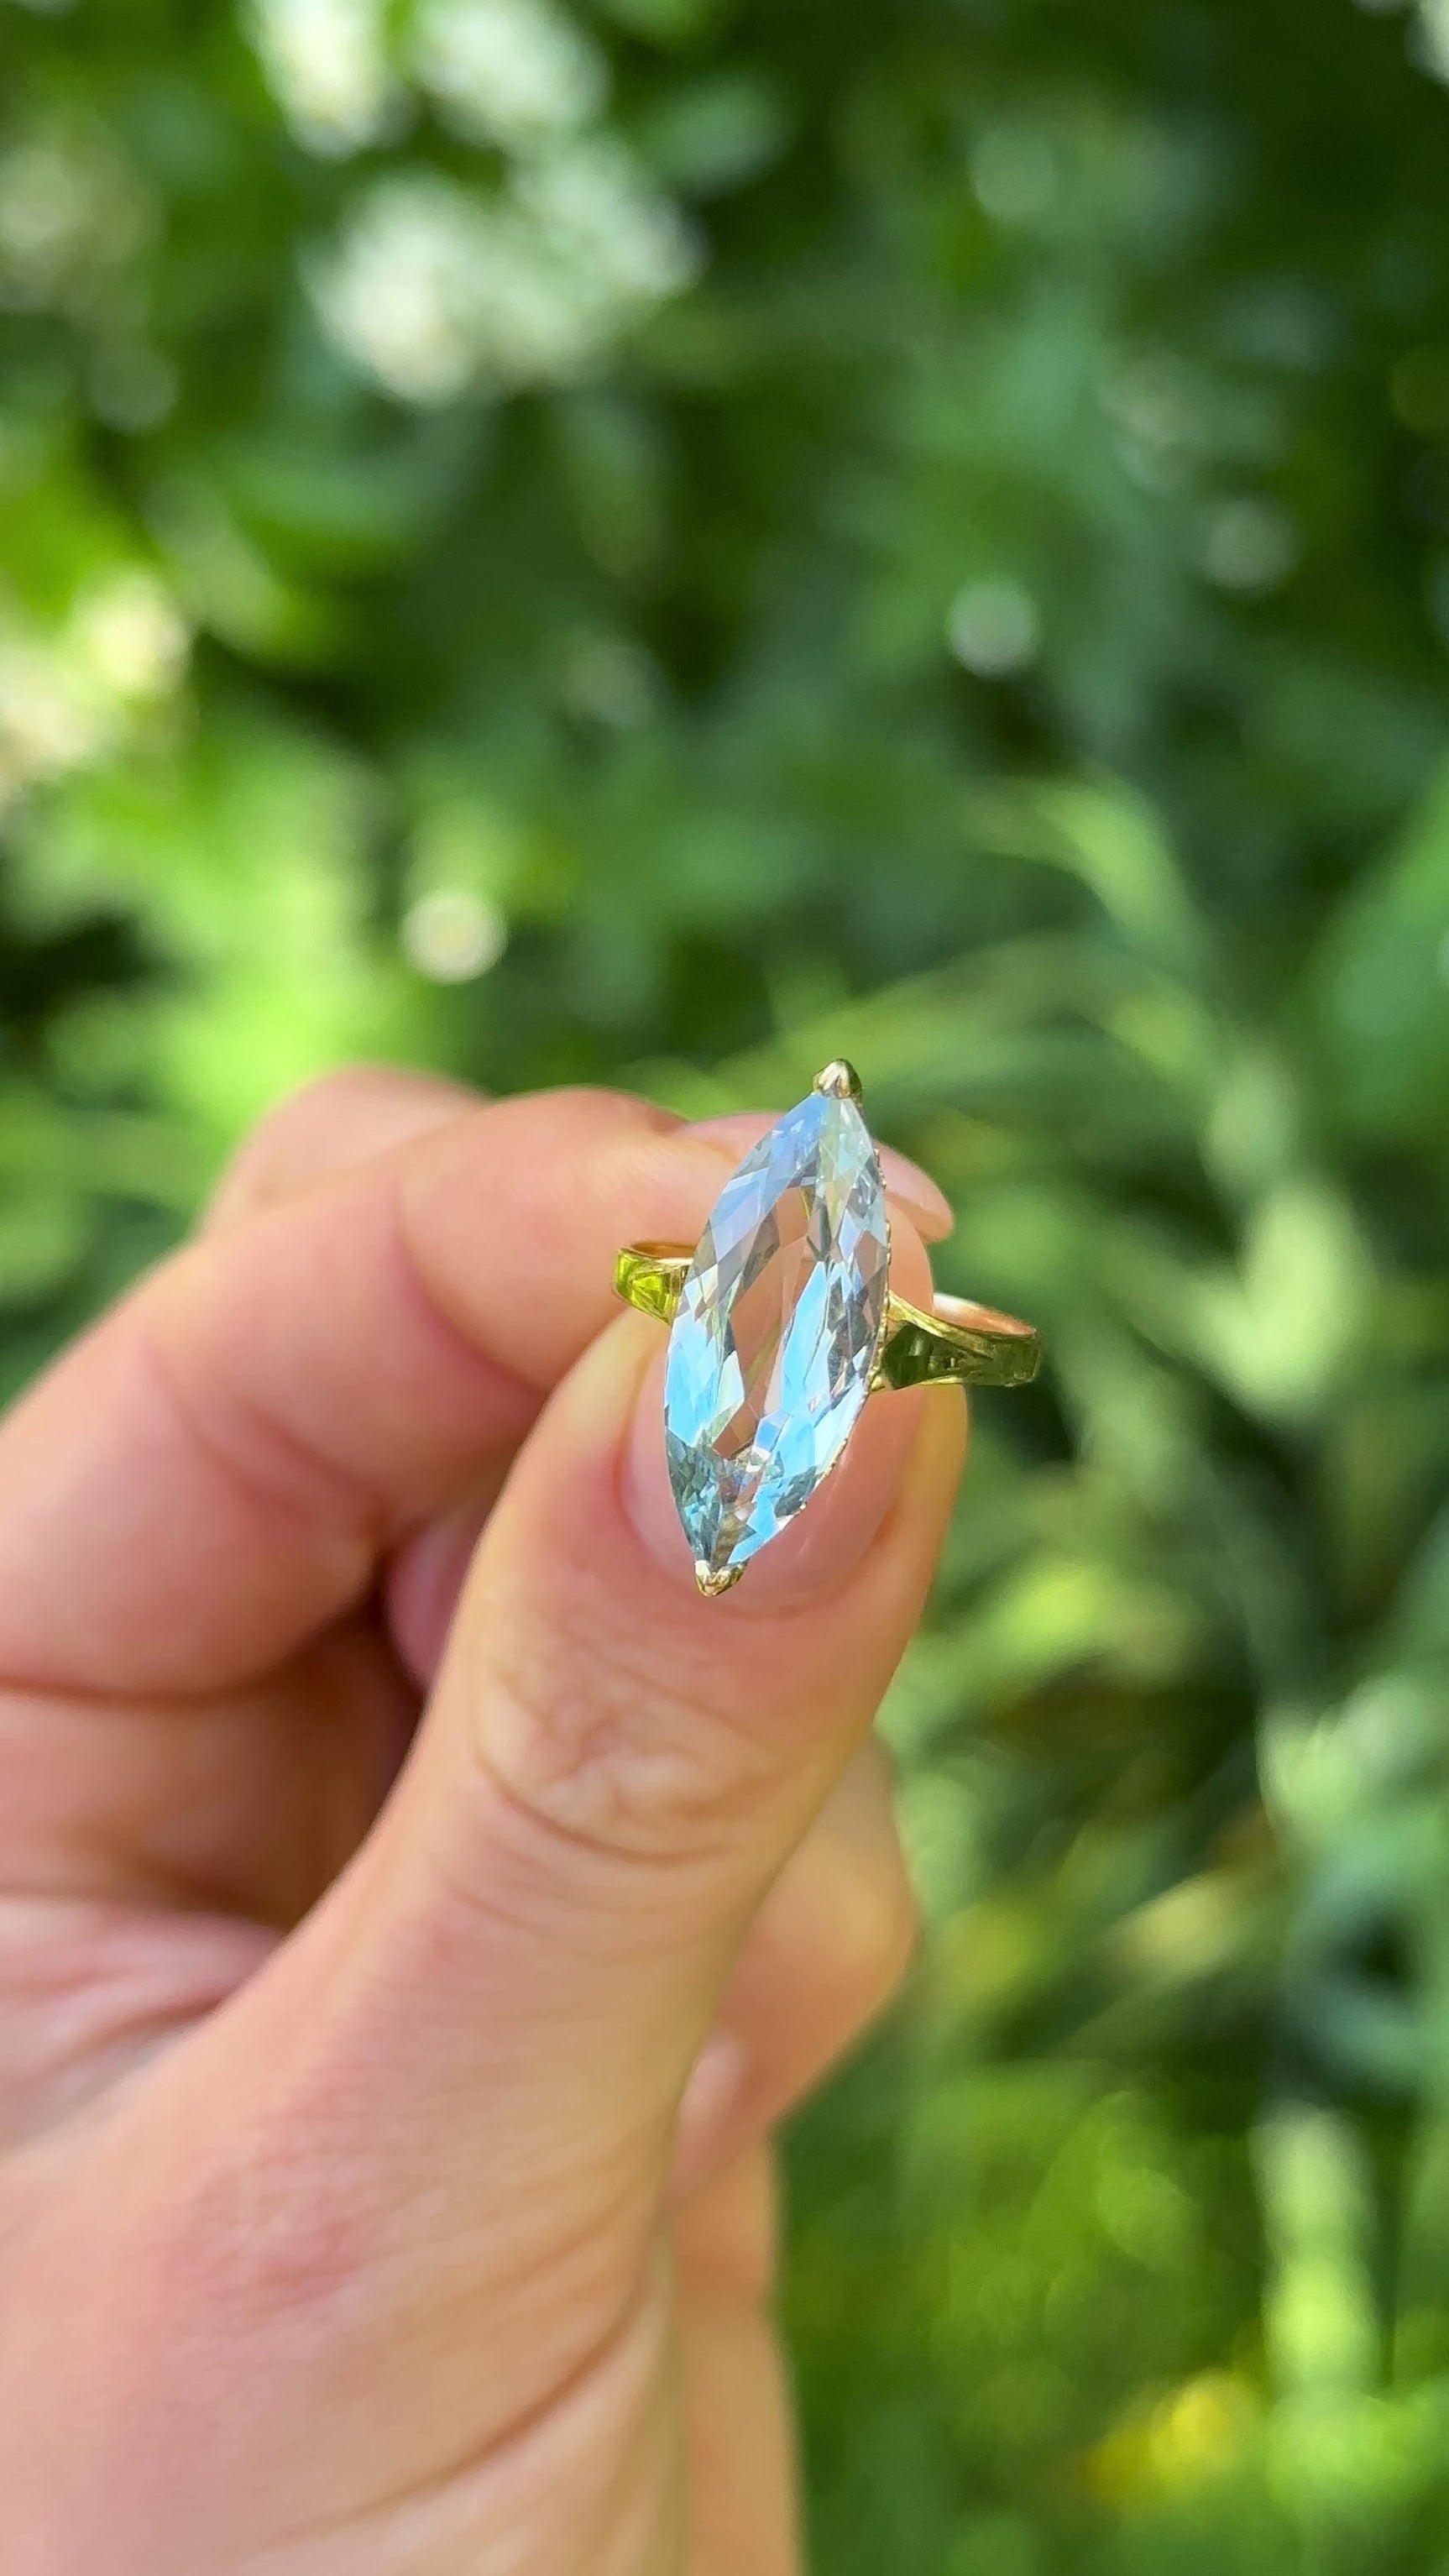 Antique Marquise-cut Aquamarine Ring, 18ct Yellow Gold held in fingers.